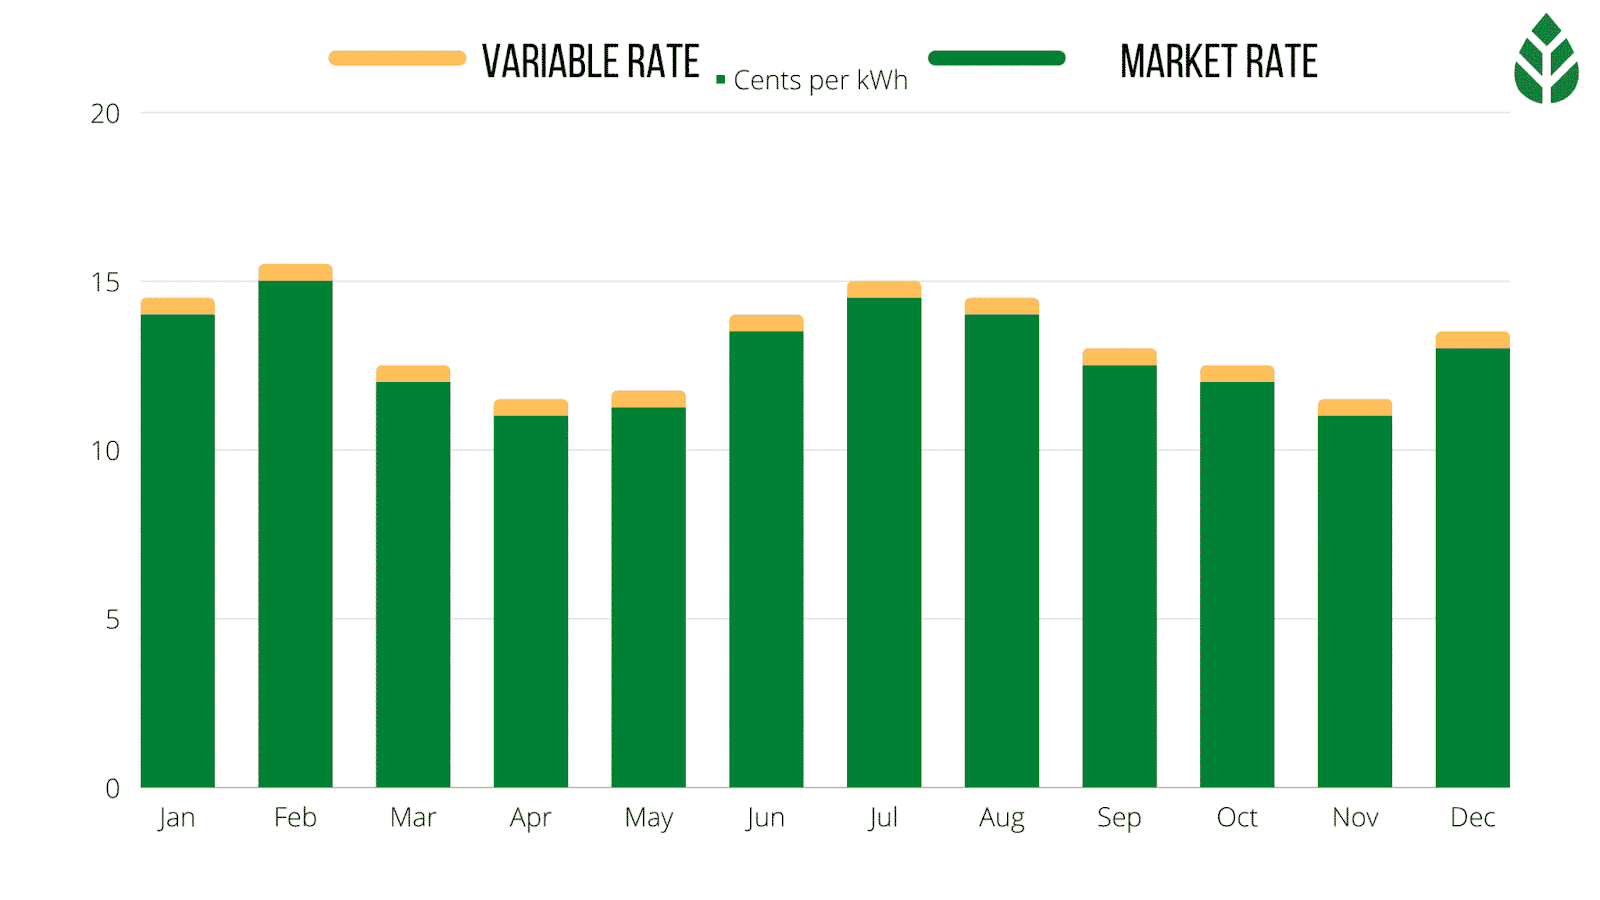 Variable Rate vs Market Rate Electricity Rates in Houston